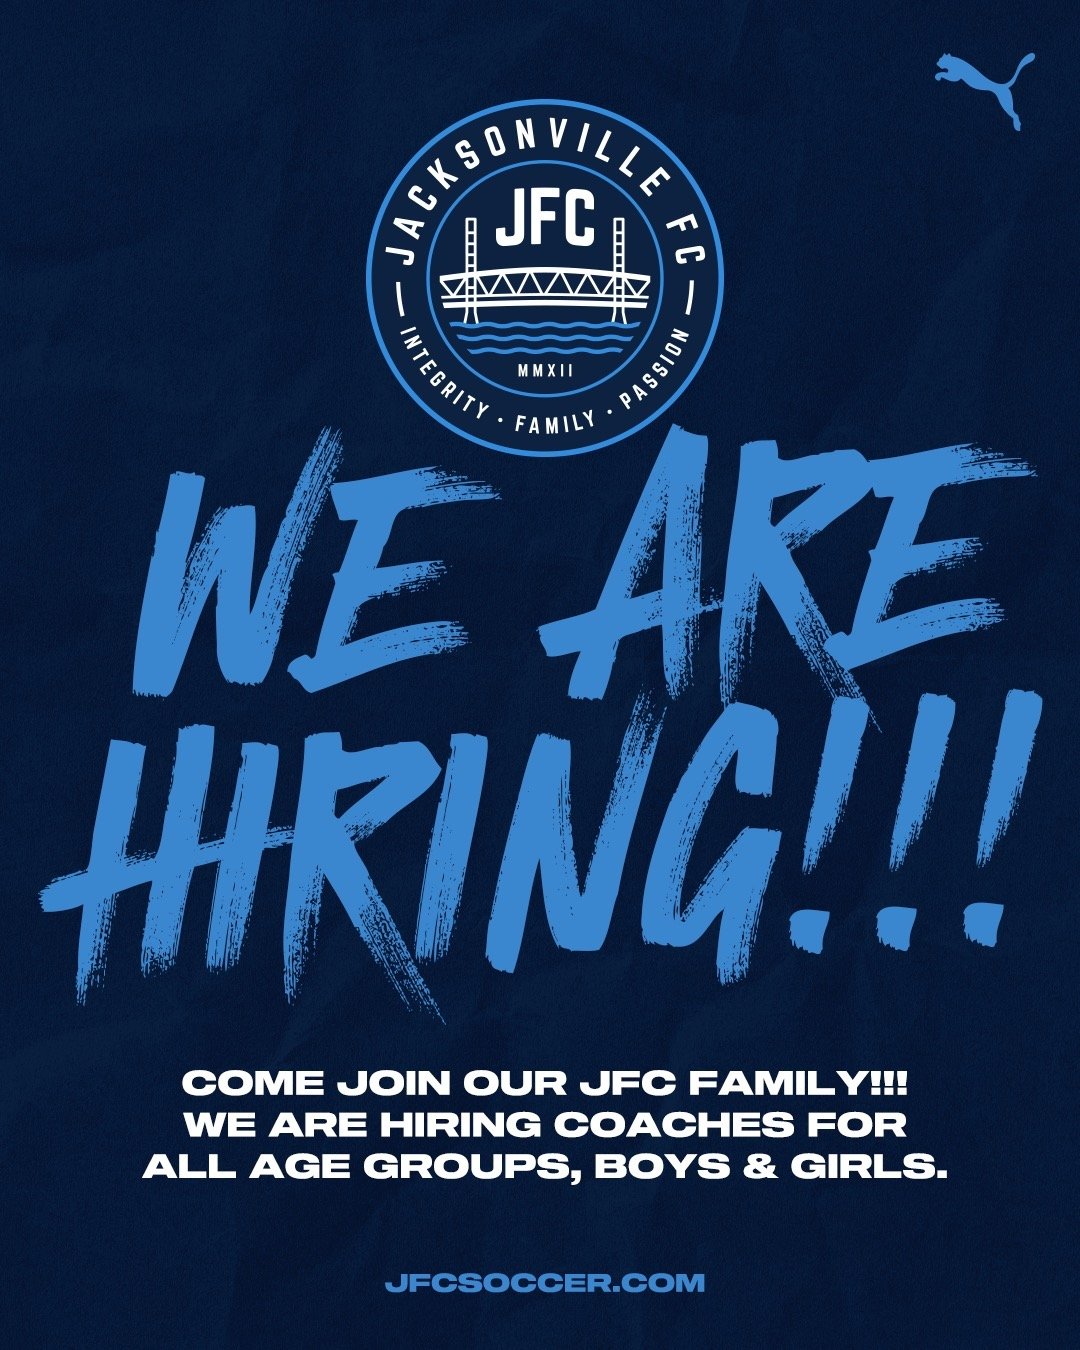 Come join our JFC Family!!!


We are hiring coaches for all age groups, boys and girls. 

Click the link in our profile and drop us a line.

#PlayerDriven #904JFC